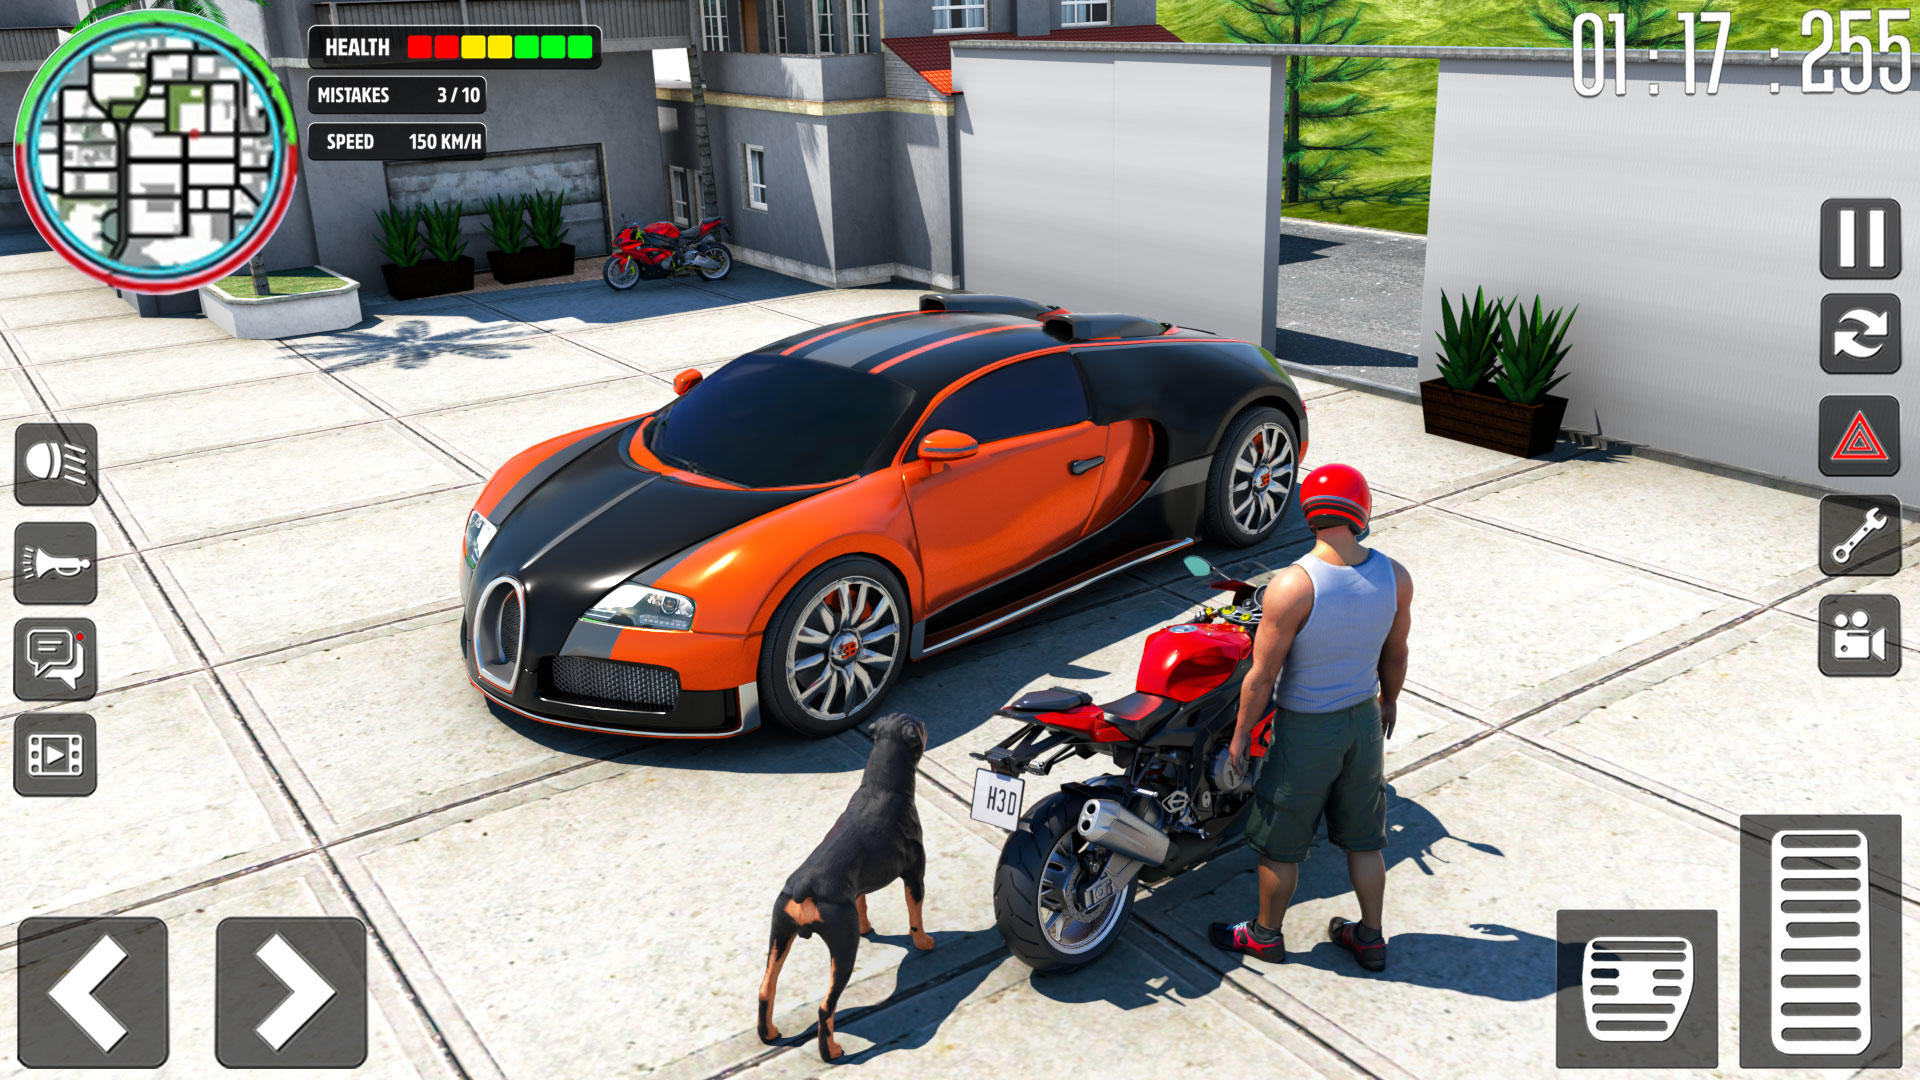 Stream Extreme Car Driving Simulator: Download MOD APK with